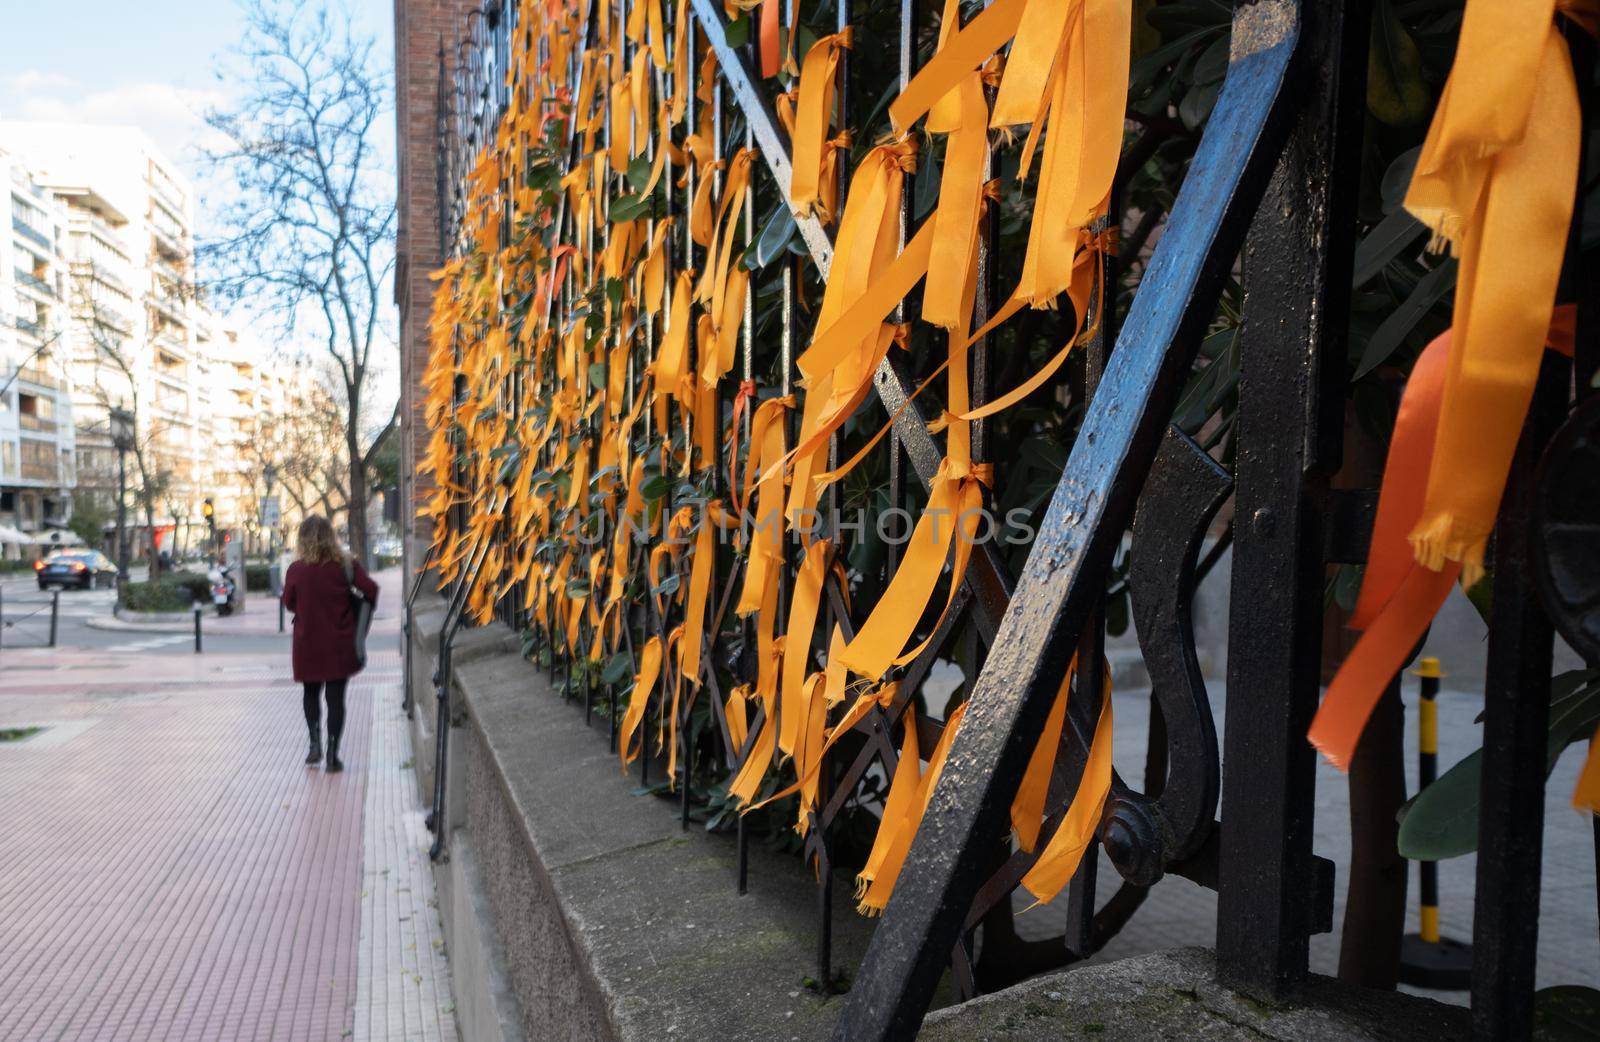 Orange ribbons in the streets of madrid by xavier_photo